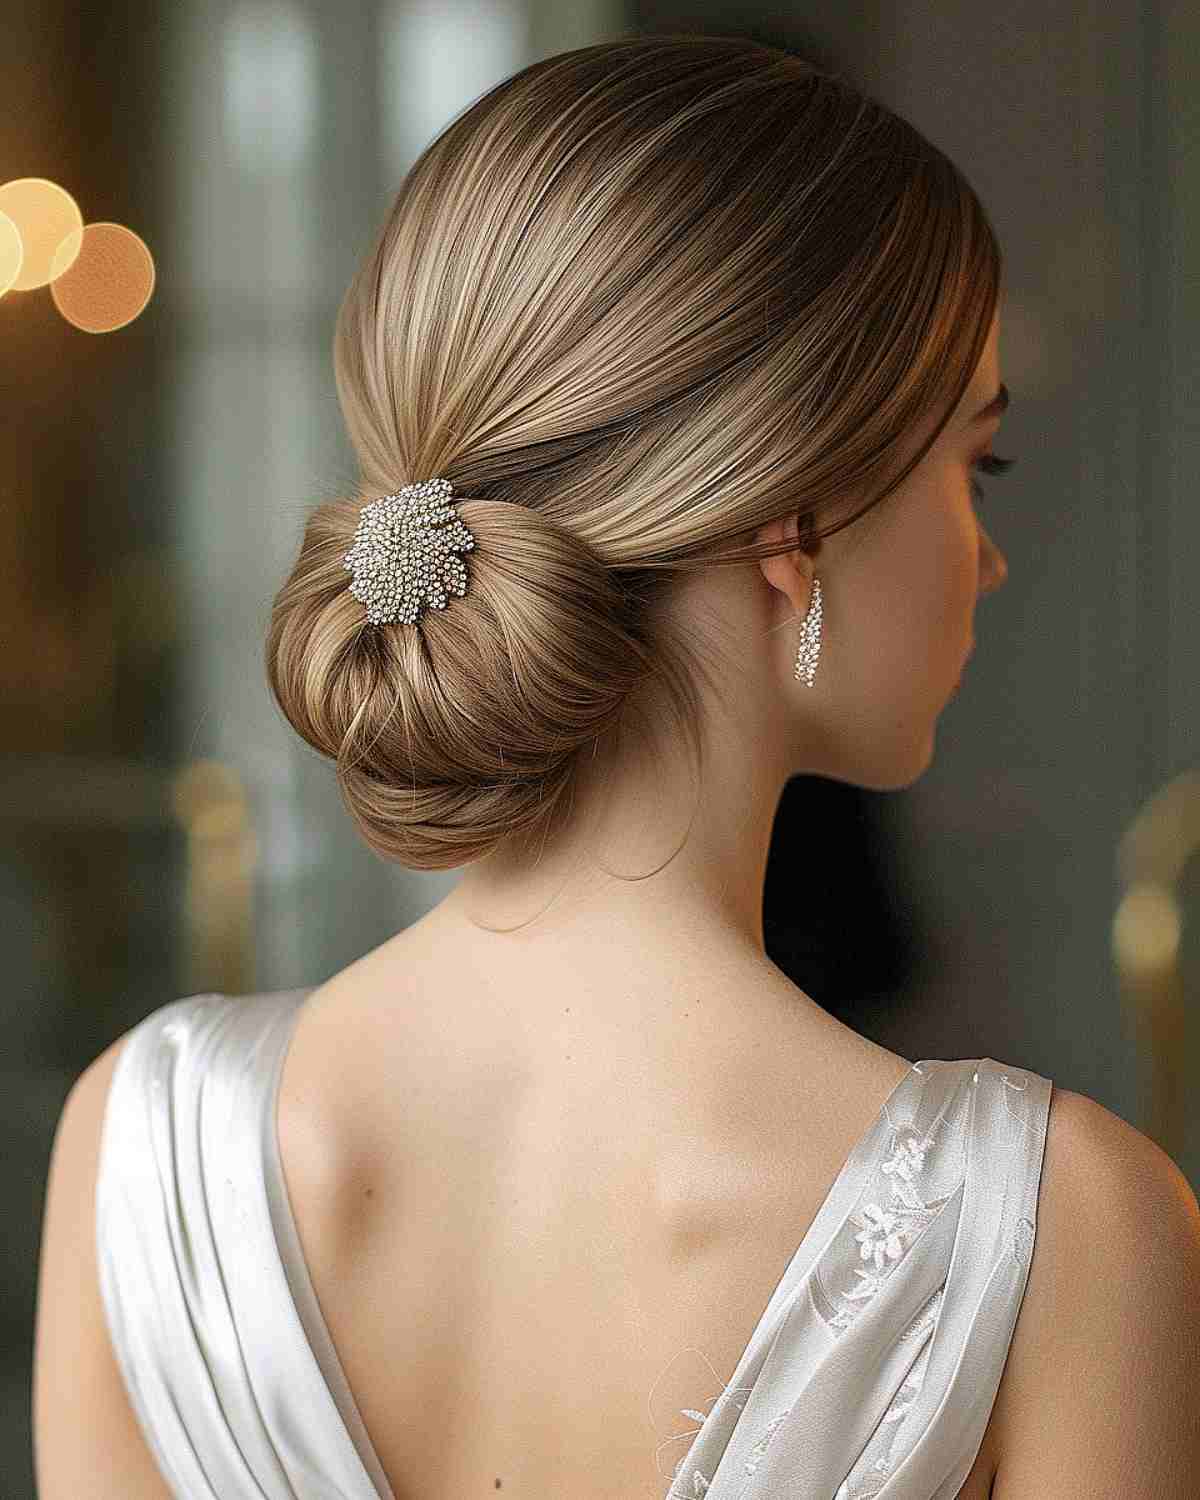 Elegant low bun with accessory for Valentine’s date